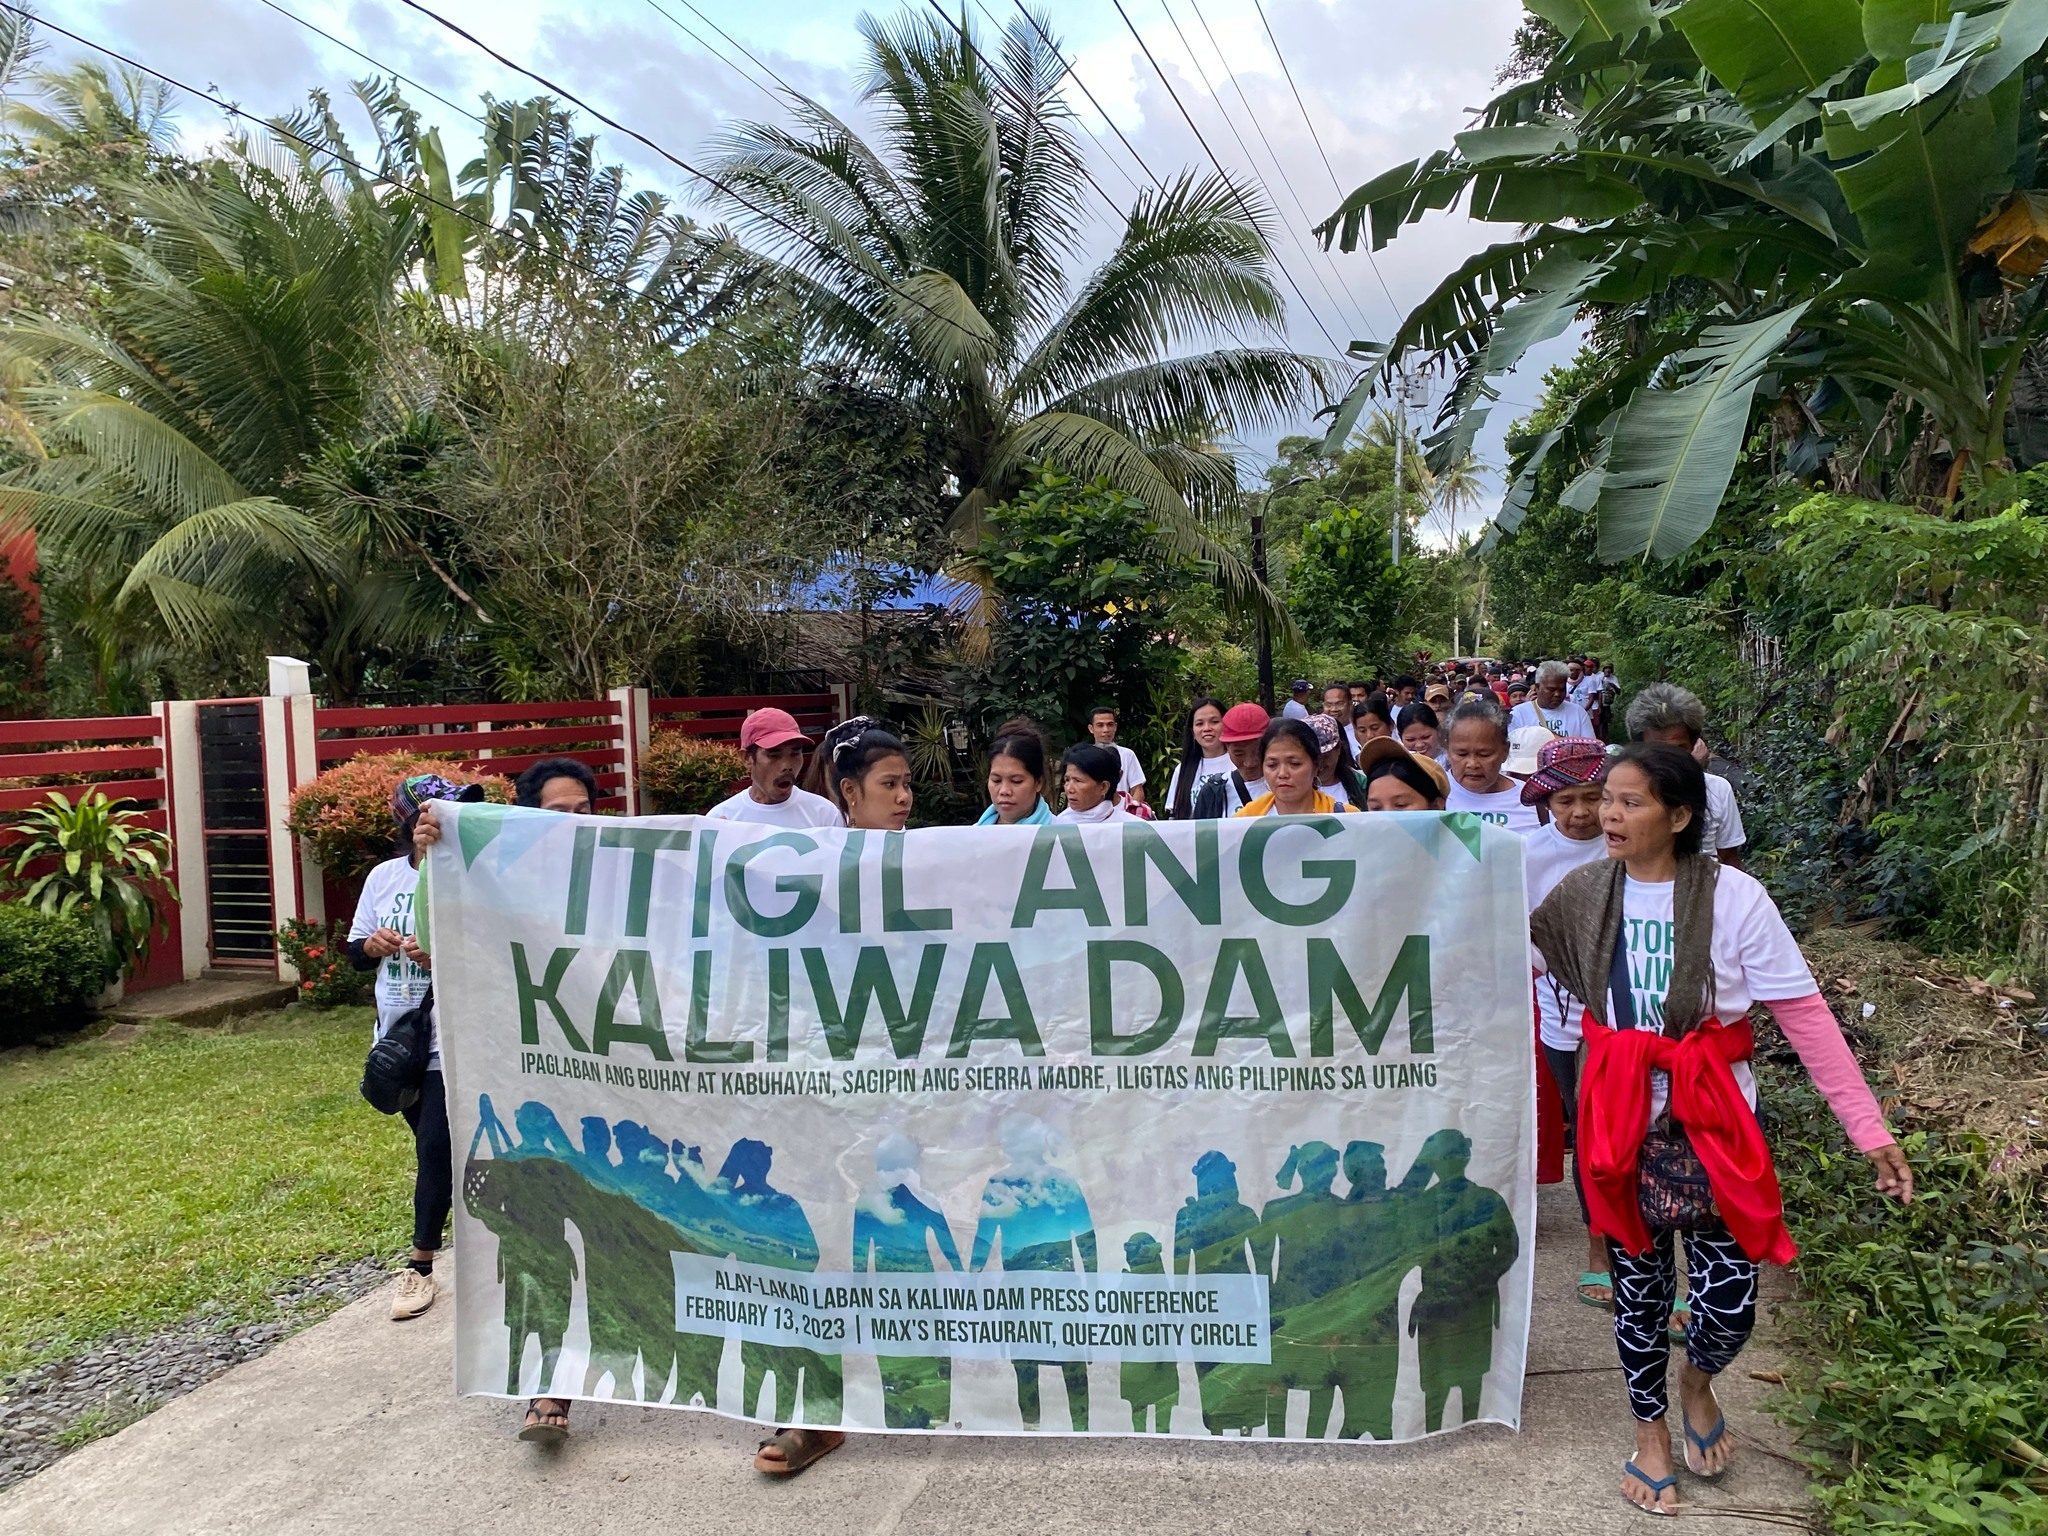 Dumagat-Remontados begin 9-day march to protest Kaliwa Dam construction